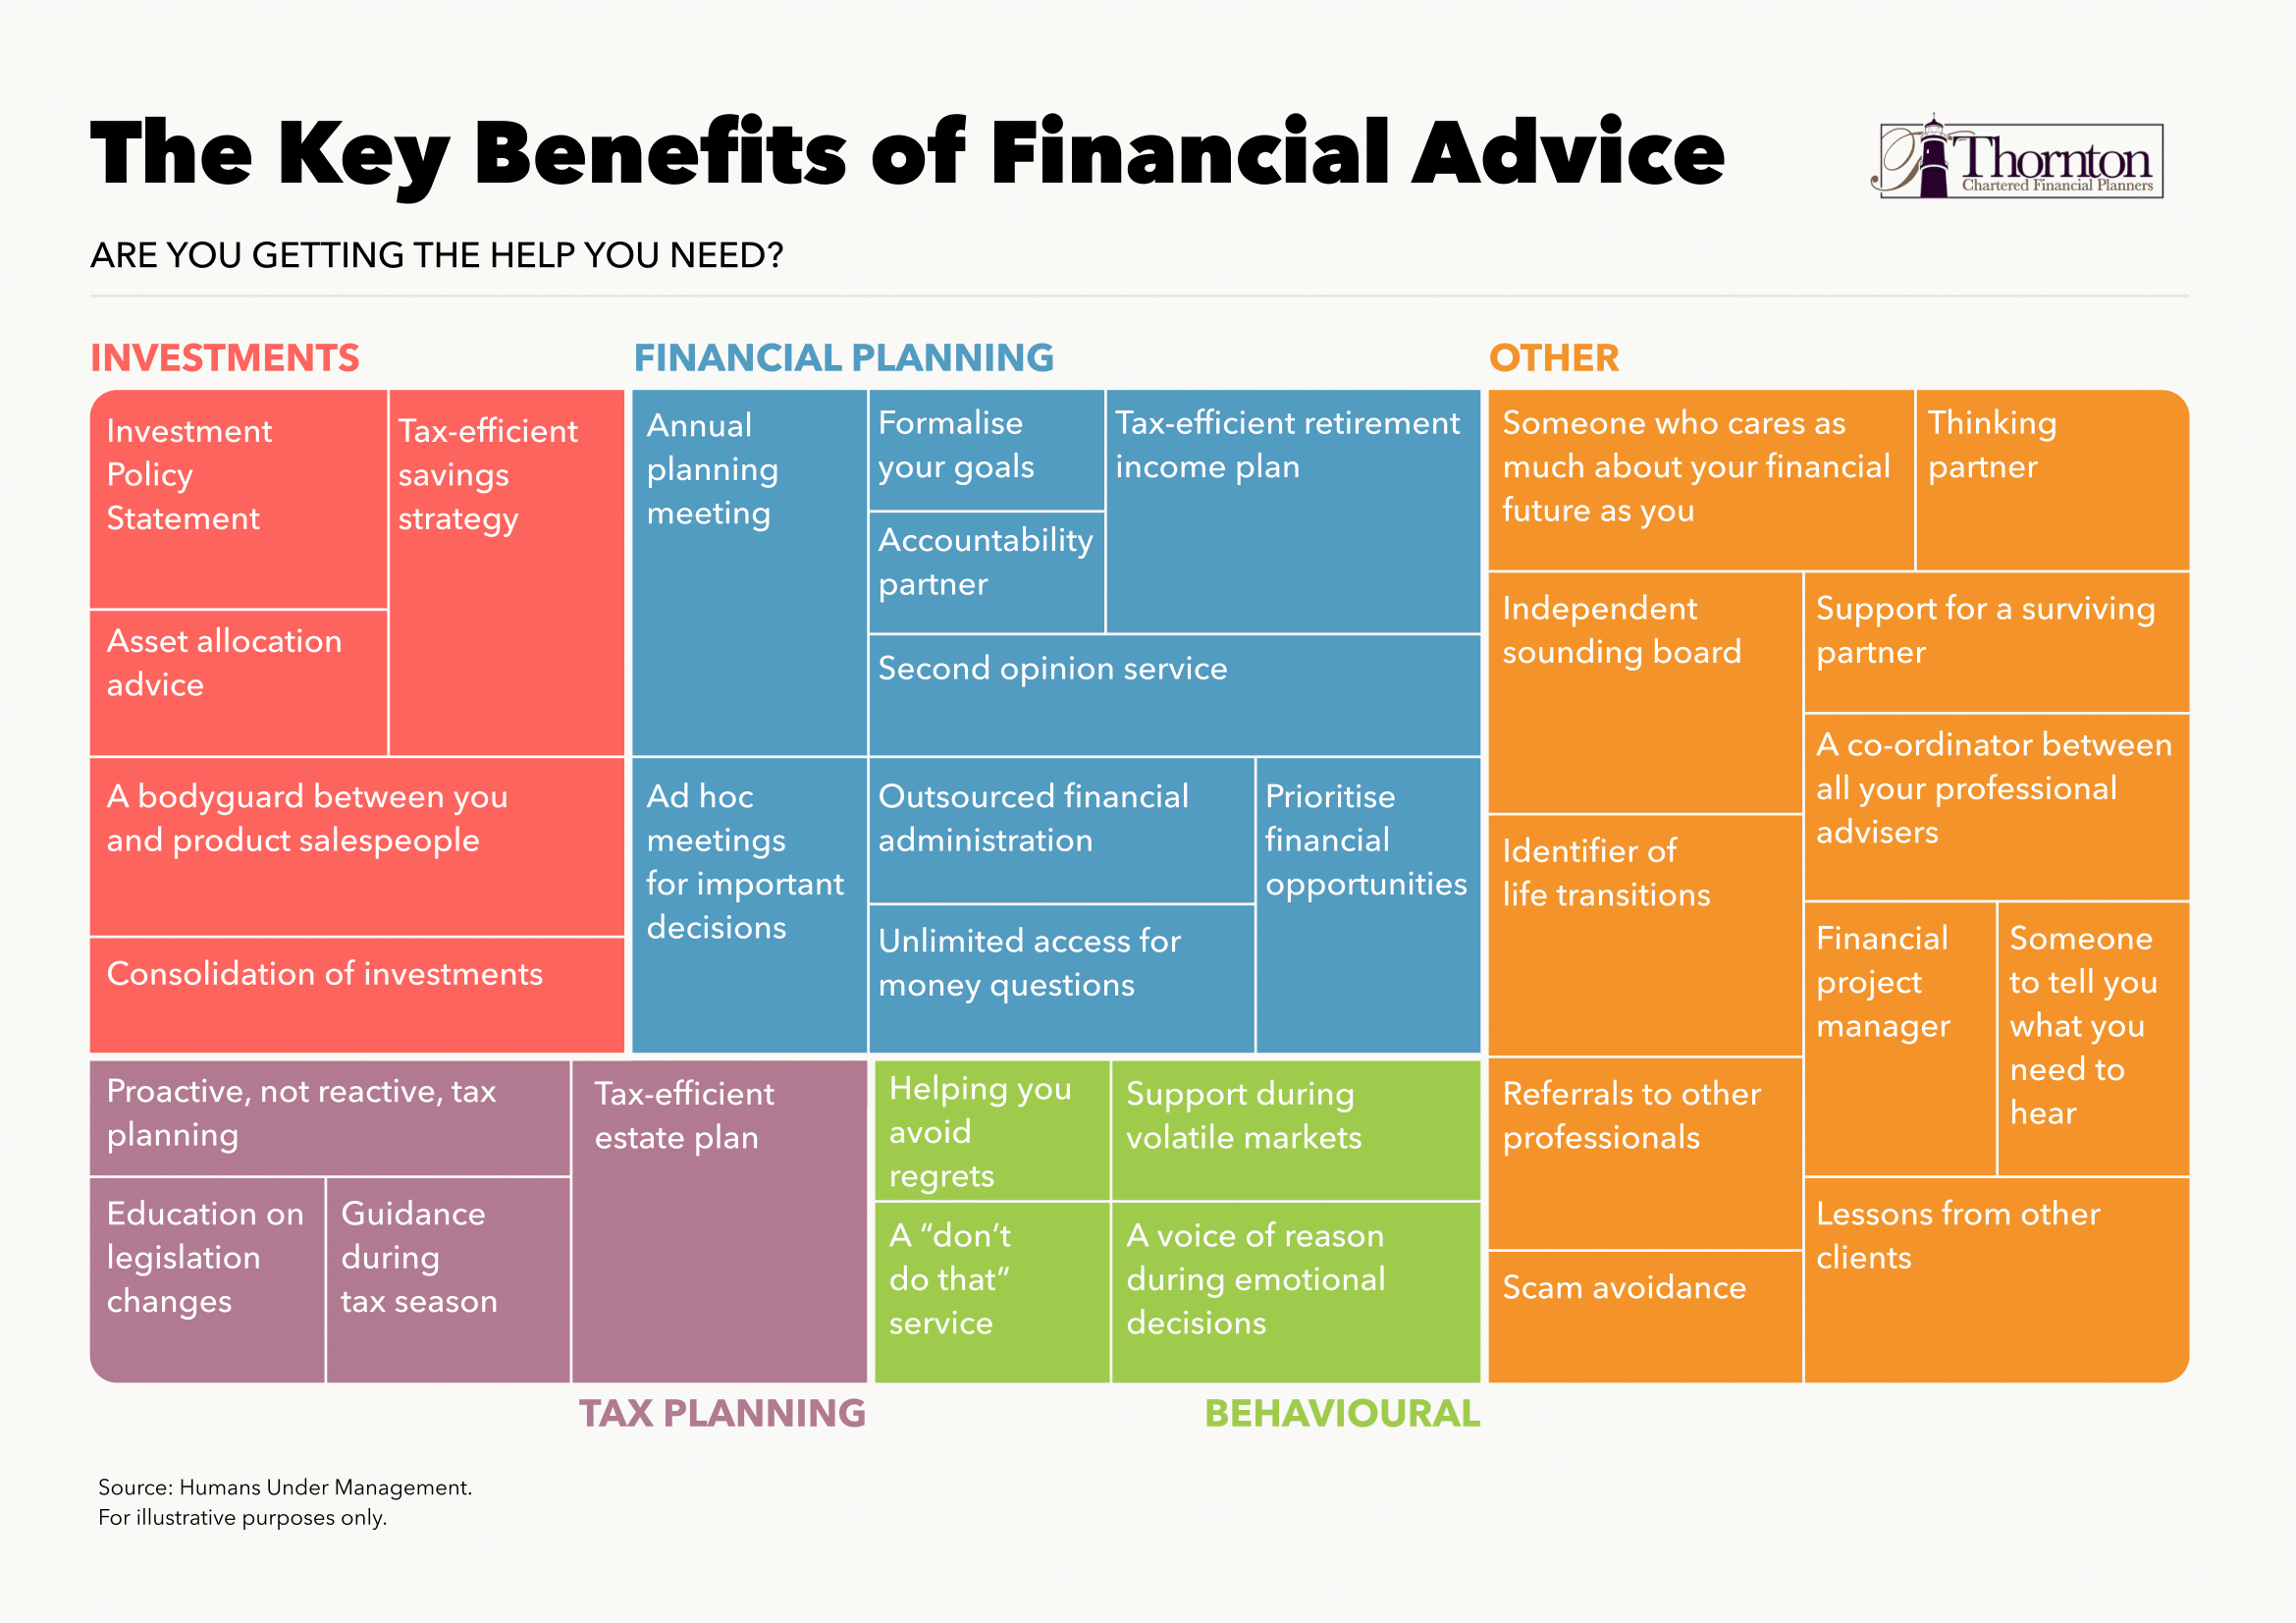 The Key Benefits of Financial Advice